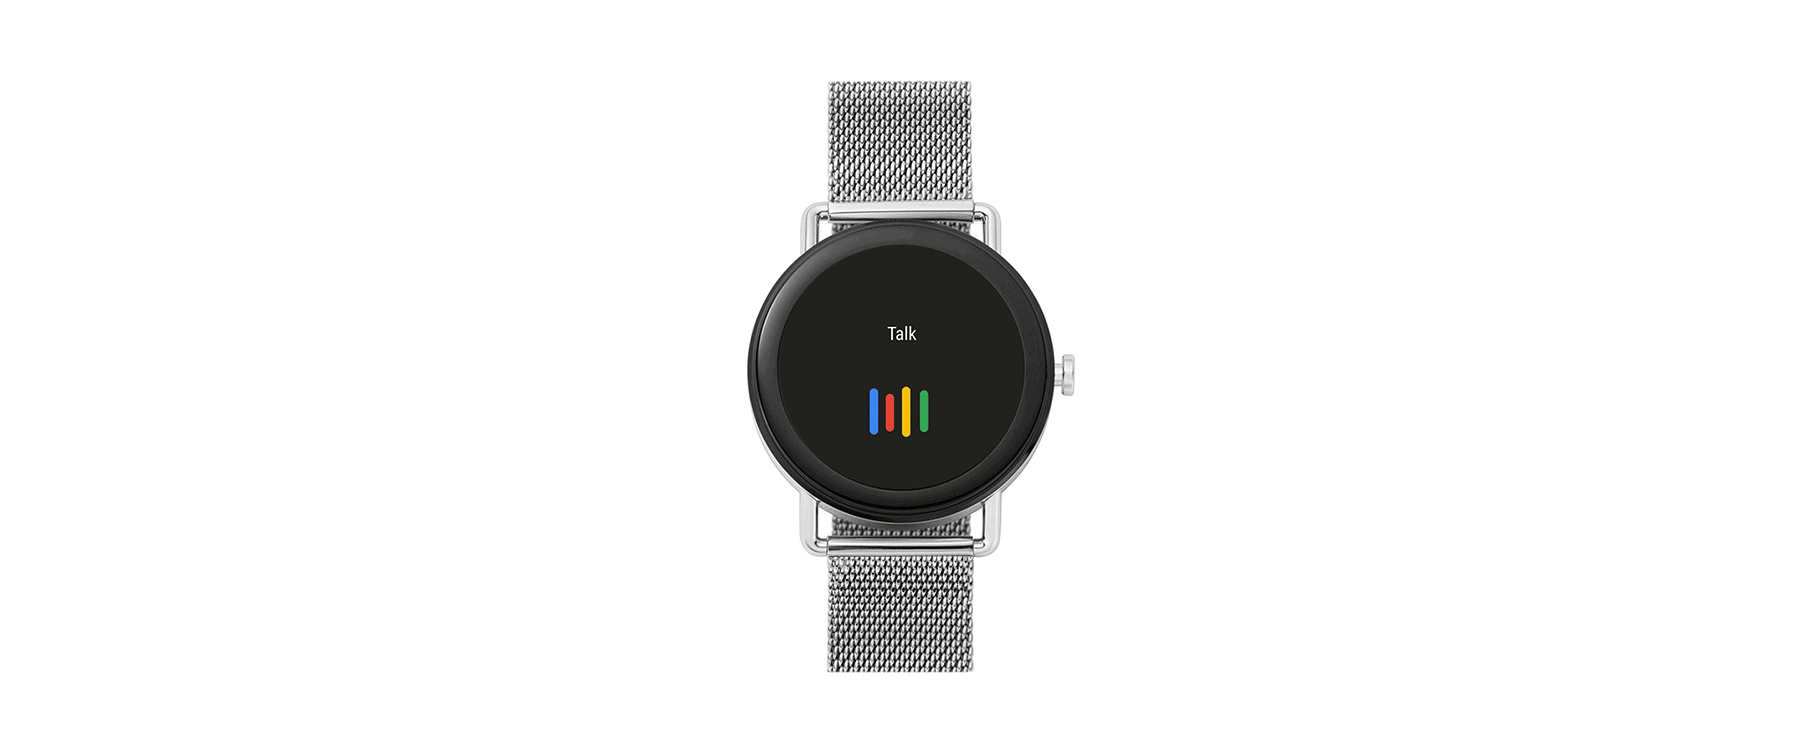 Google Assistant on Wear OS watches is getting much more useful - The Verge